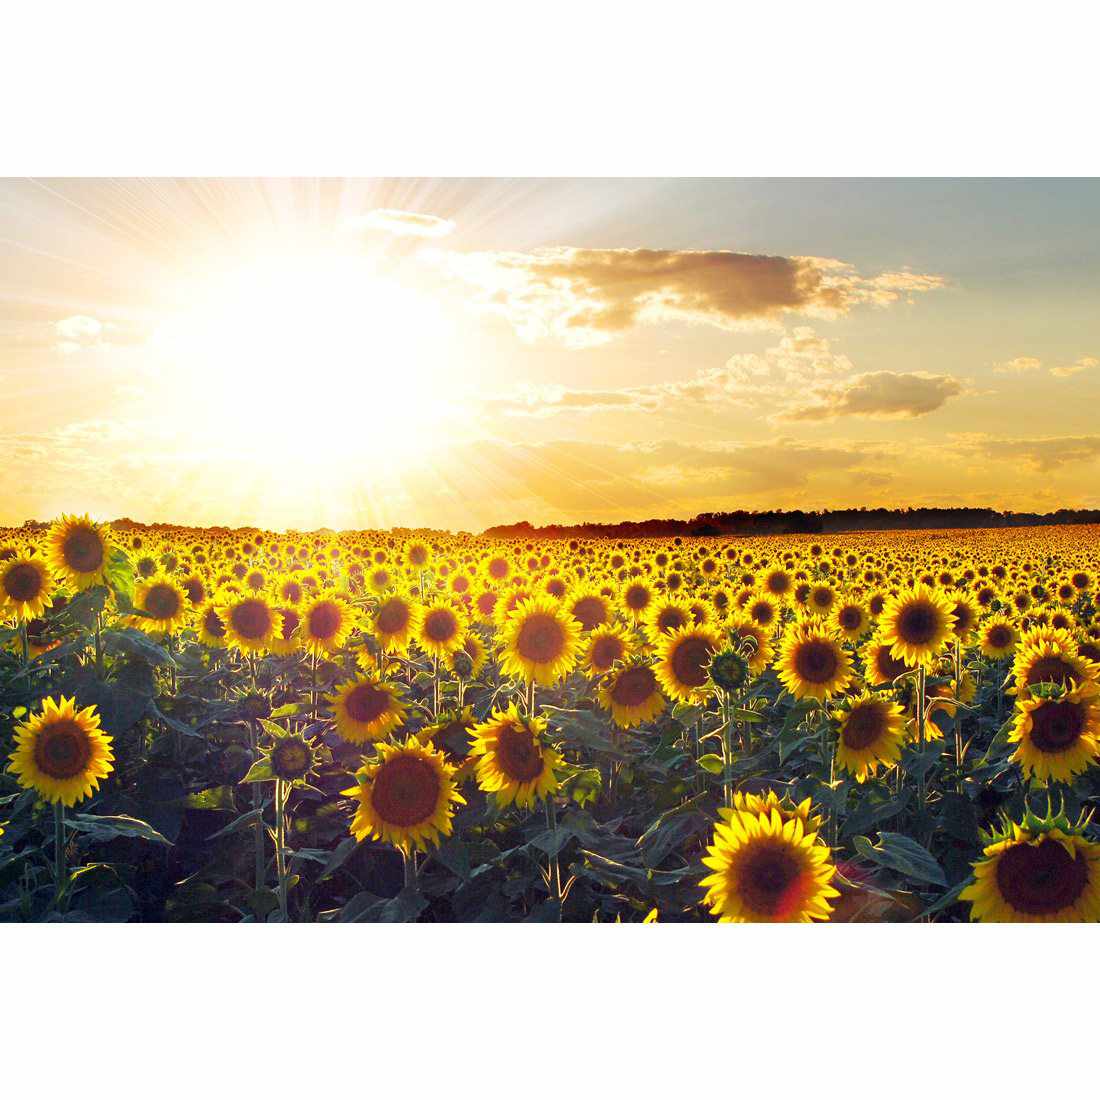 Sunflowers At Sunset Canvas Art-Canvas-Wall Art Designs-45x30cm-Canvas - No Frame-Wall Art Designs